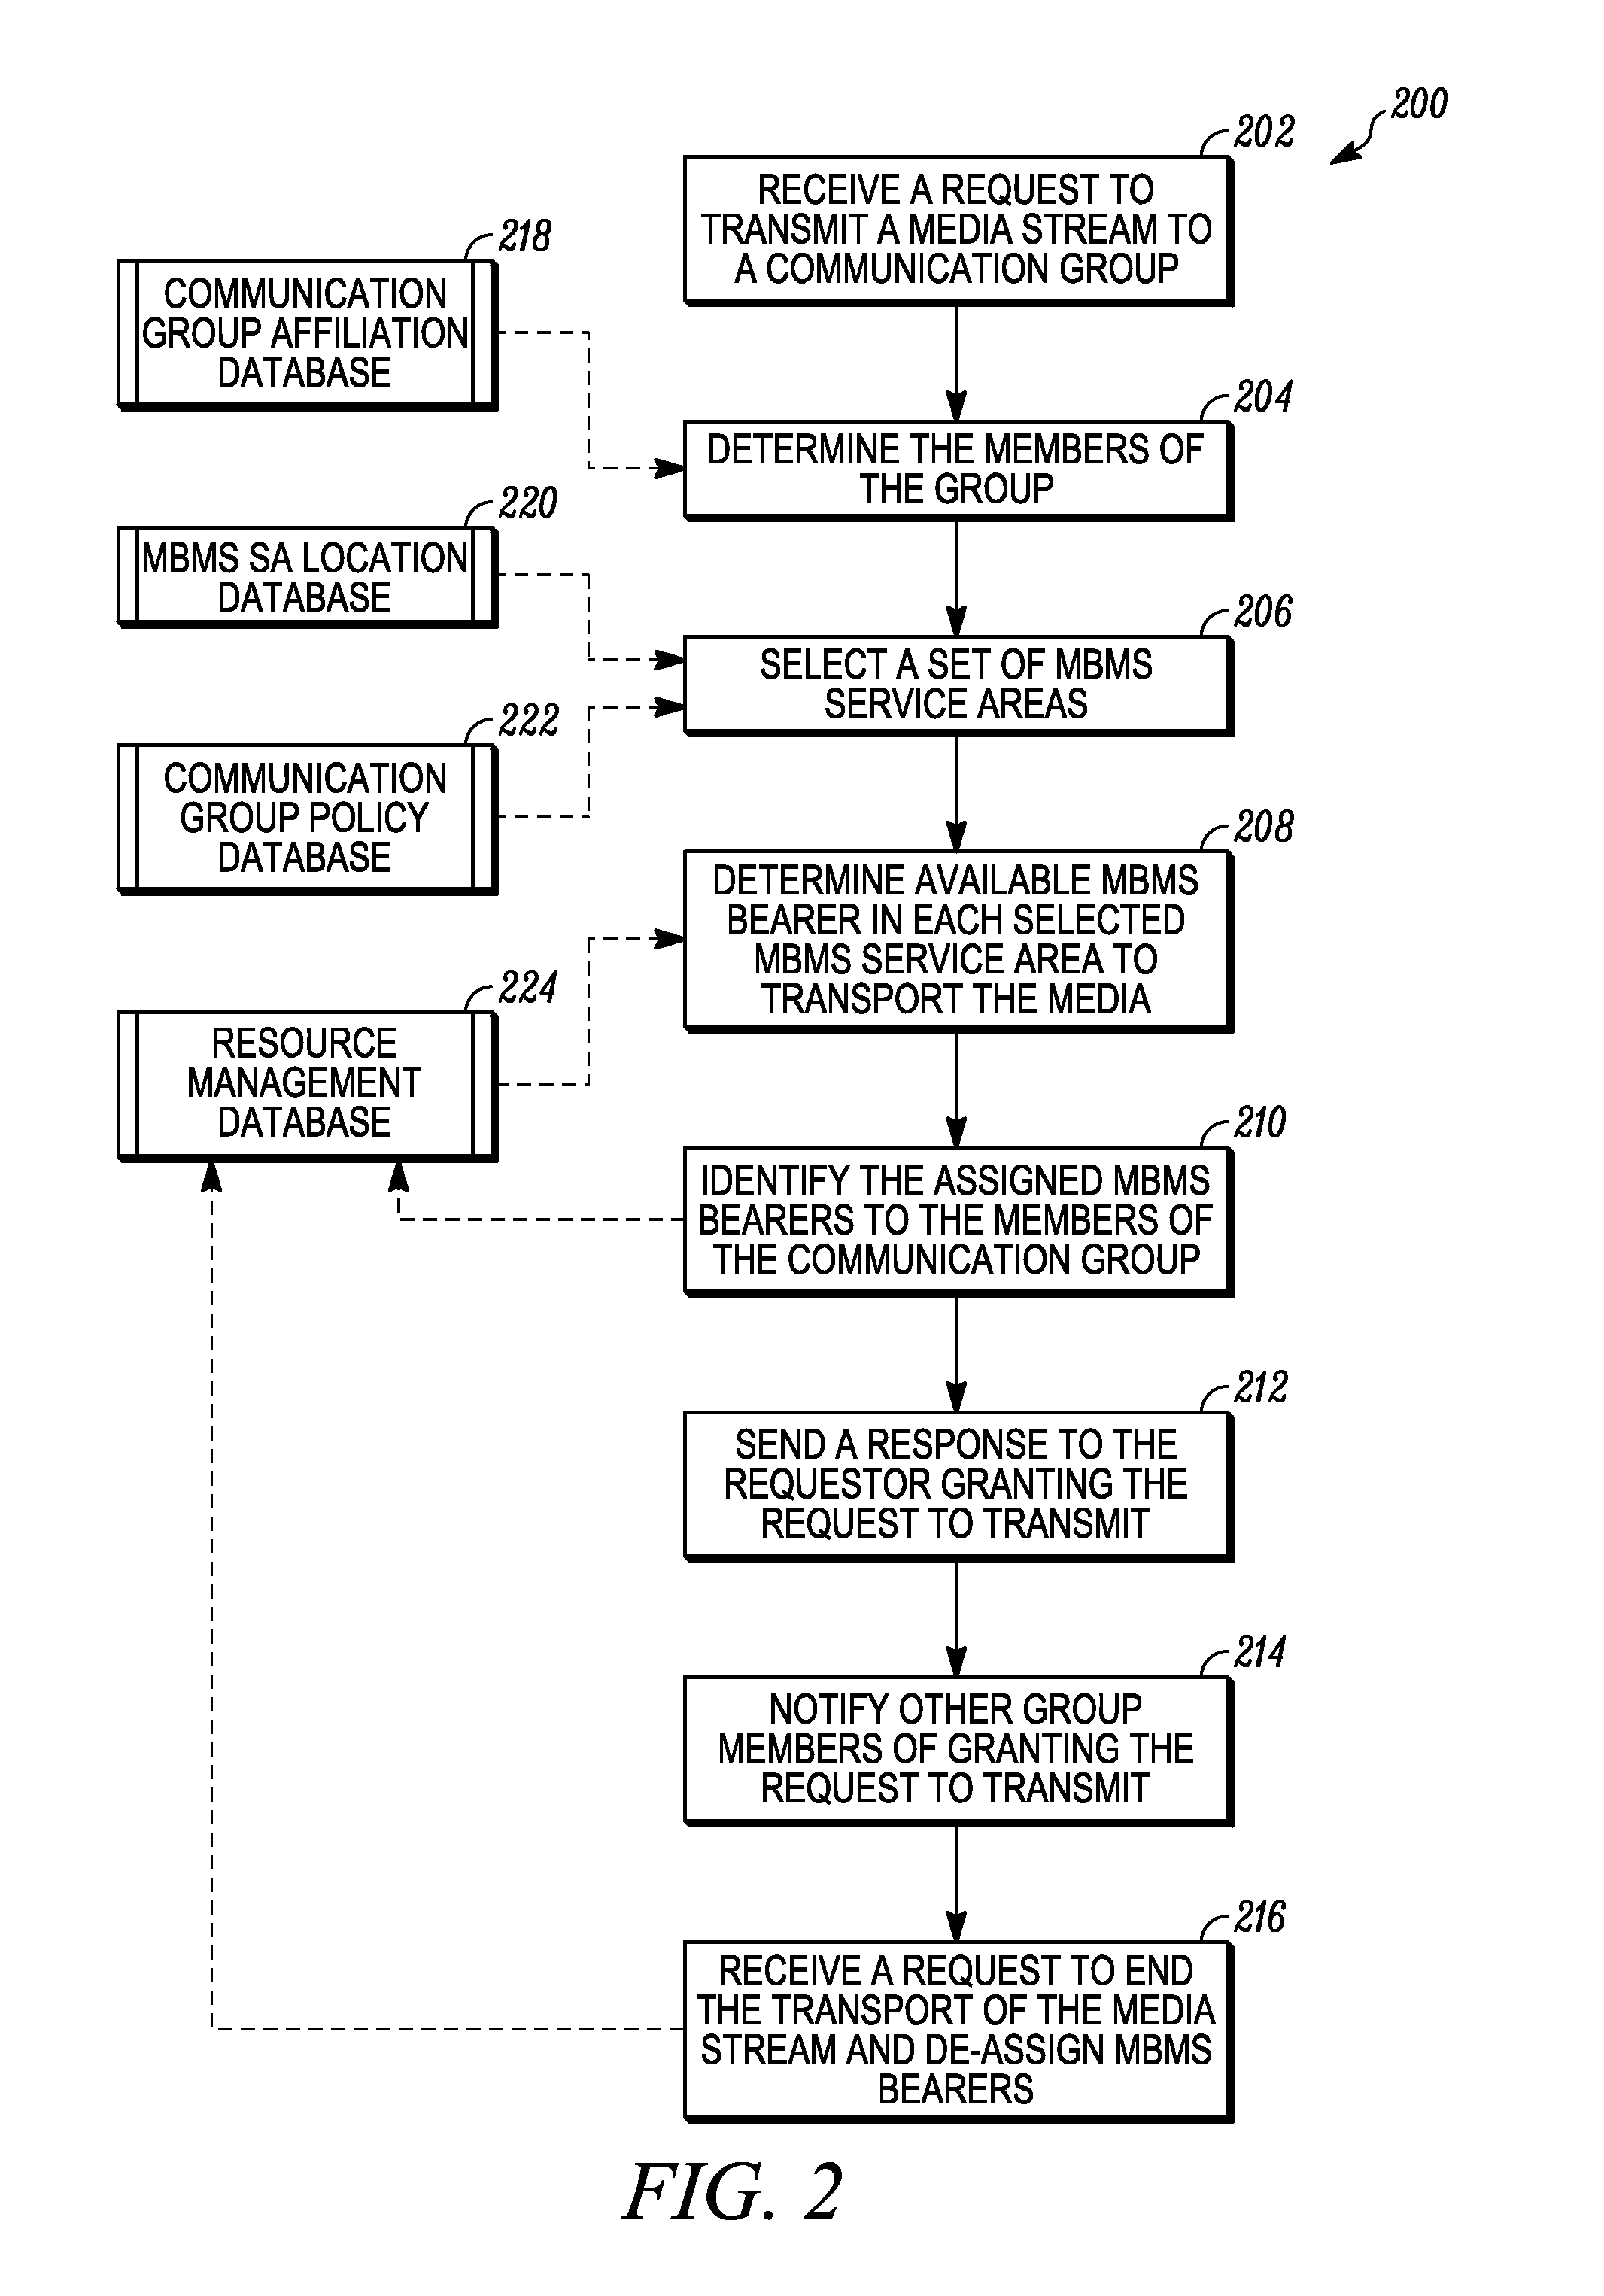 Methods for assigning a plethora of group communications among a limited number of pre-established MBMS bearers in a communication system